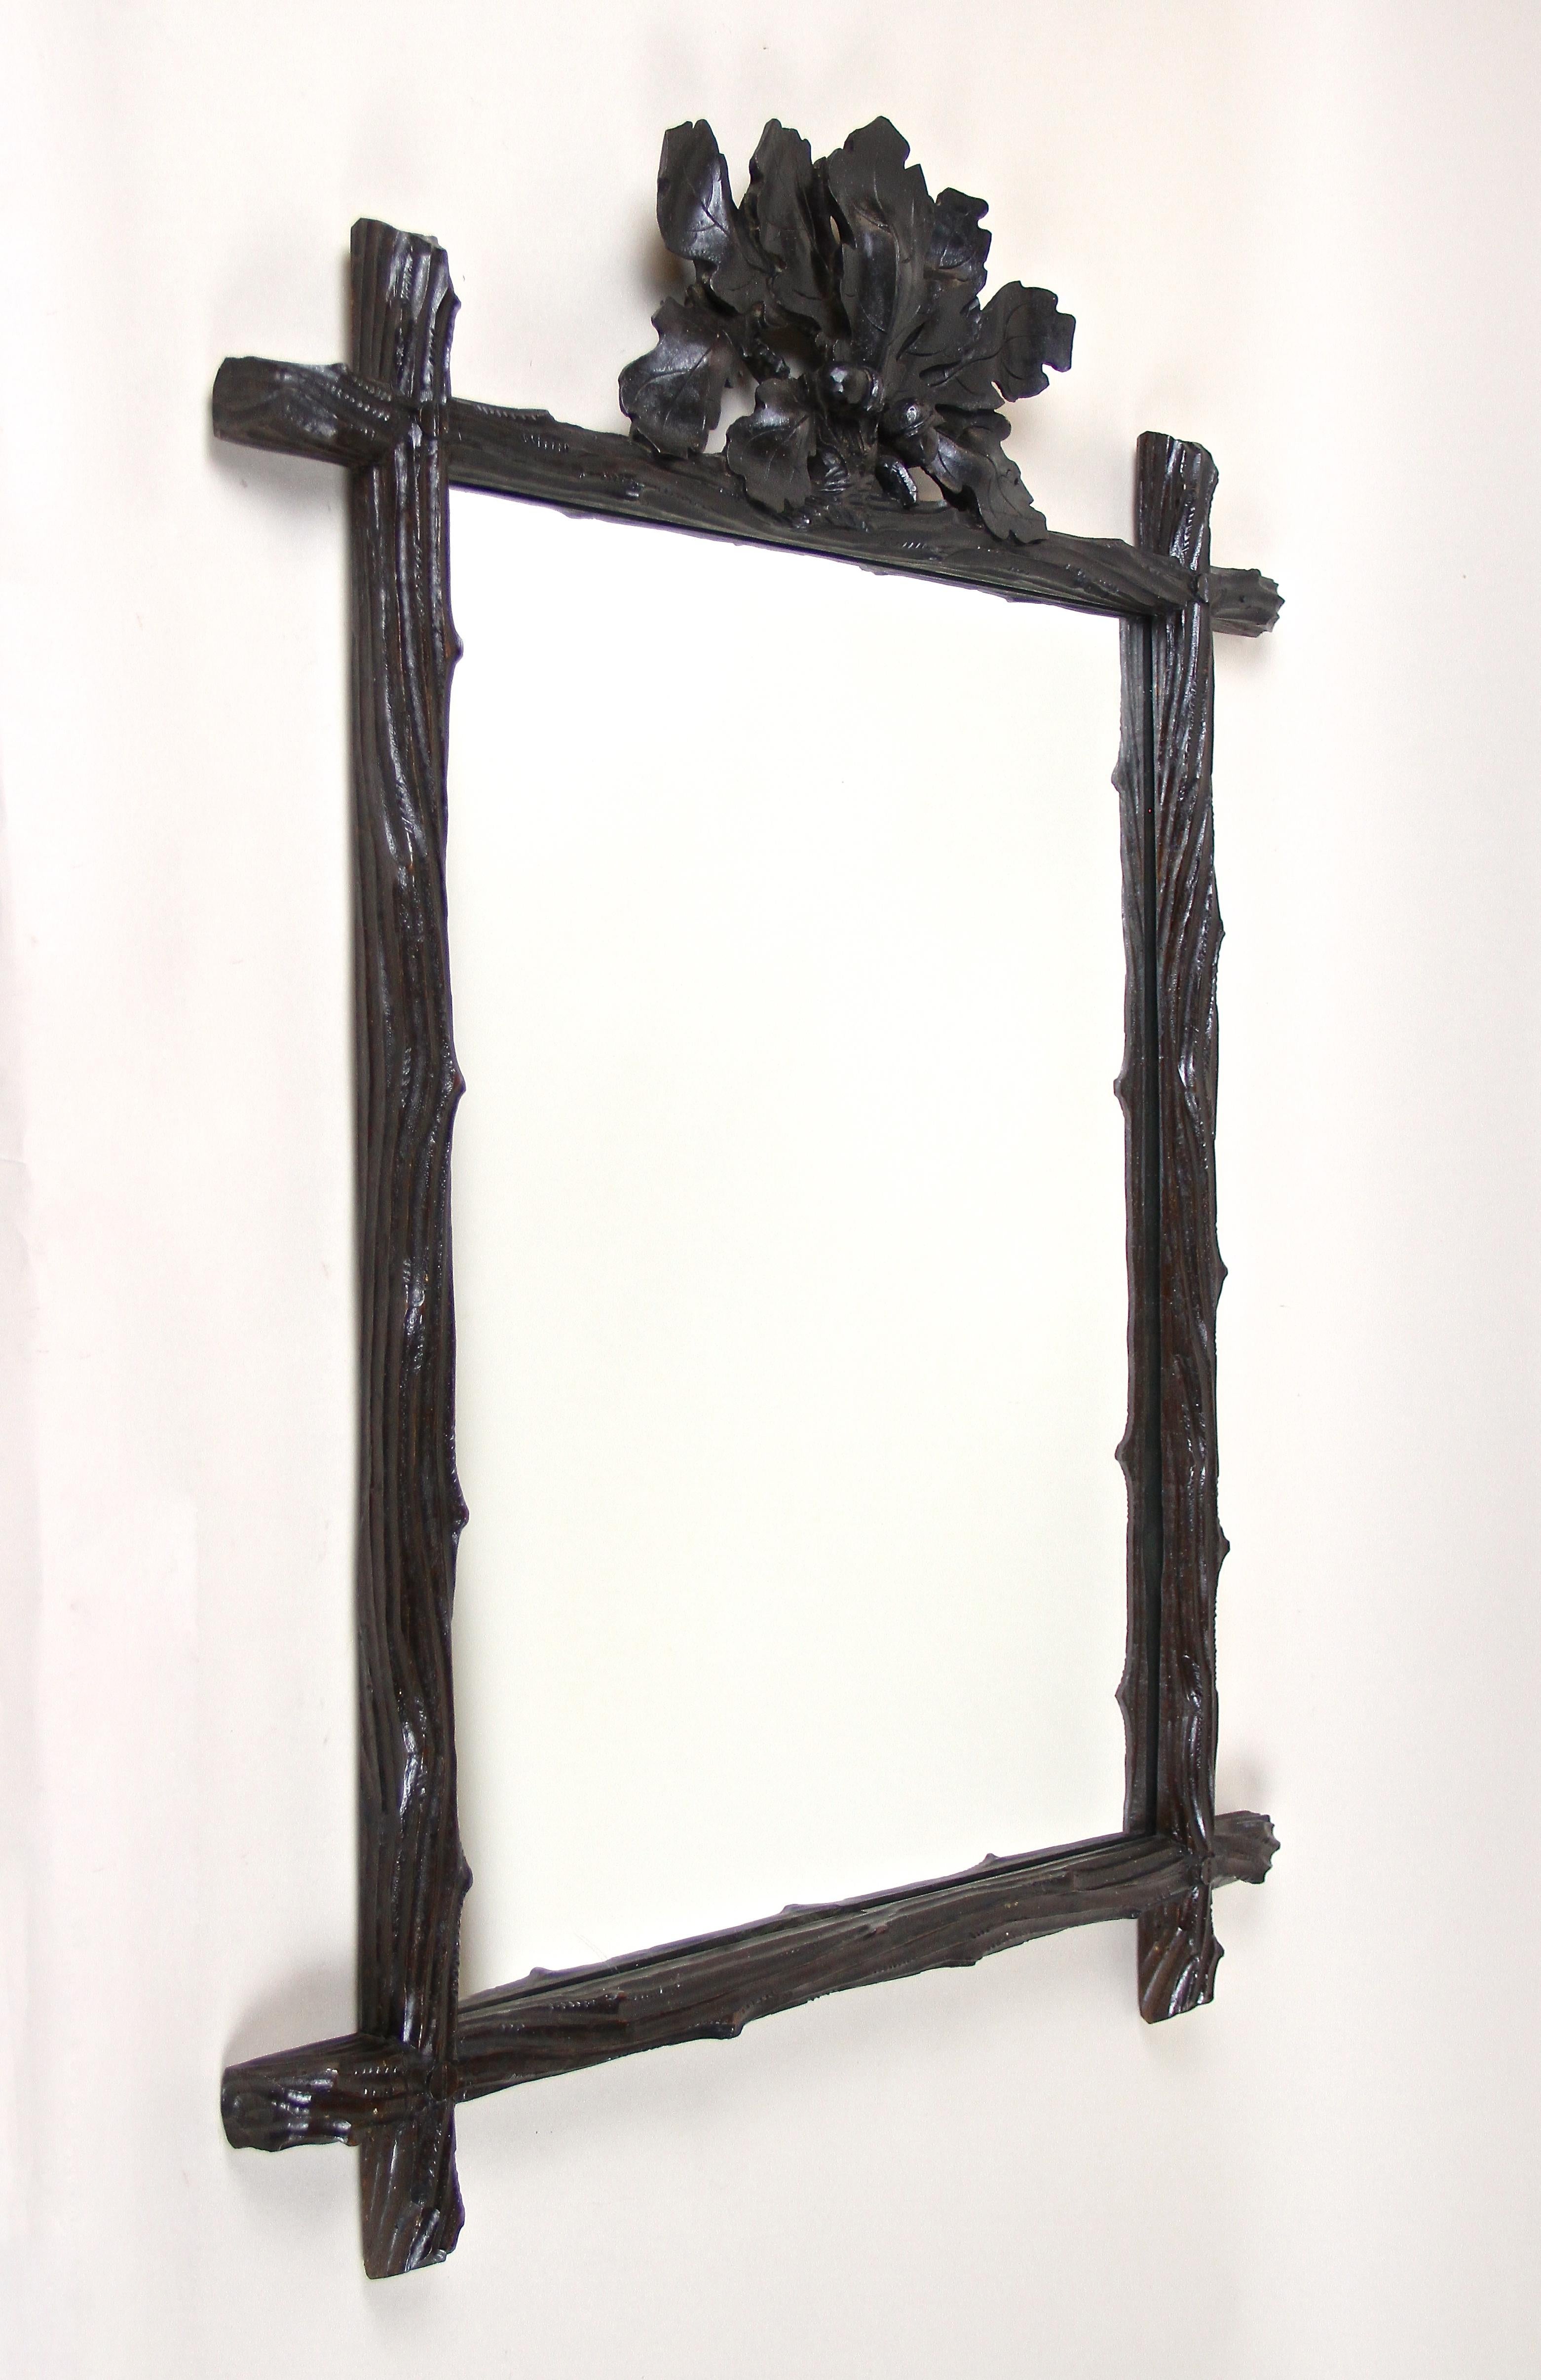 Exceptional Black Forest Mirror from the late 19th century in Austria around 1870. This phenomenal, elaborately hand carved rustic wall mirror impresses with its simple but artfully designed 